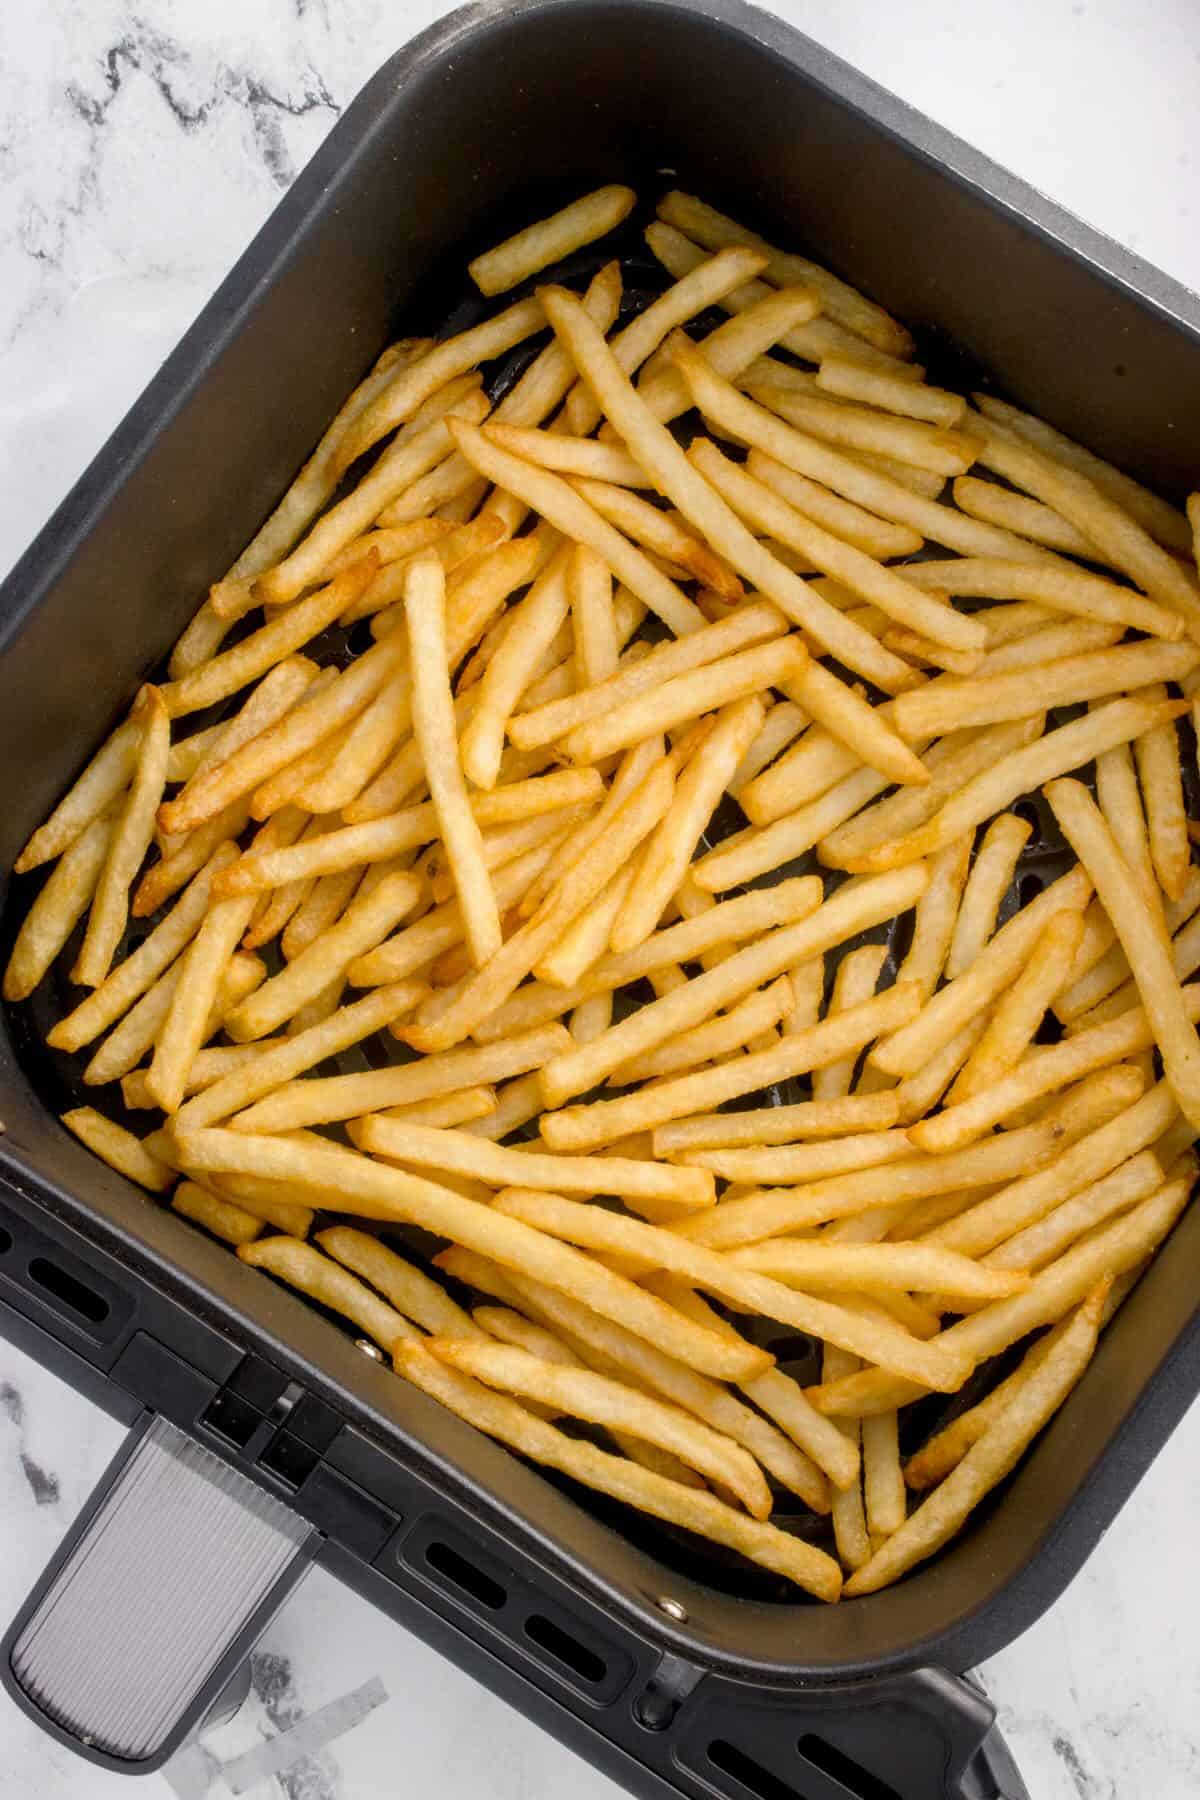 An air fryer basket full of golden brown air-fried french fries. 